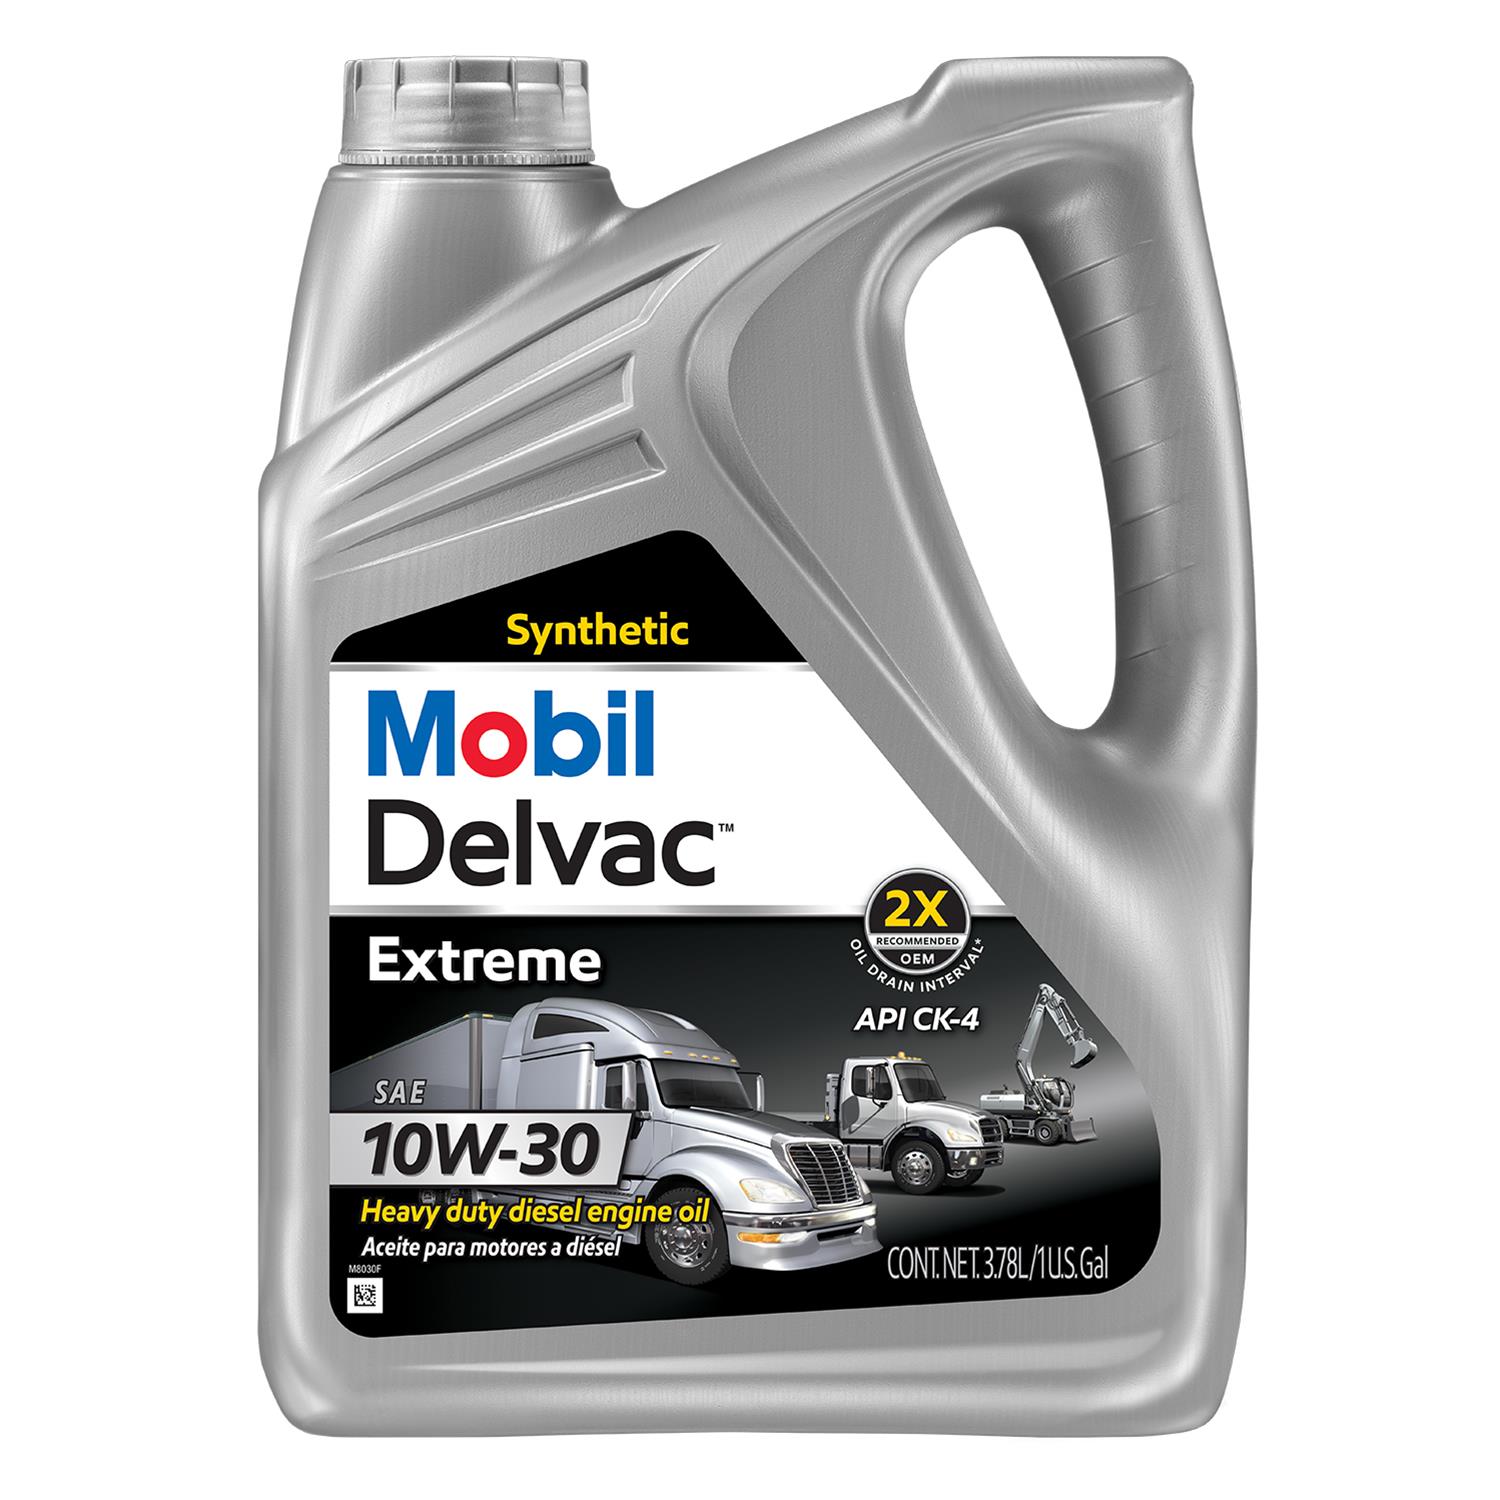 122454-1 Delvac Extreme Synthetic Motor Oil, 10W-30, 1-Gallon